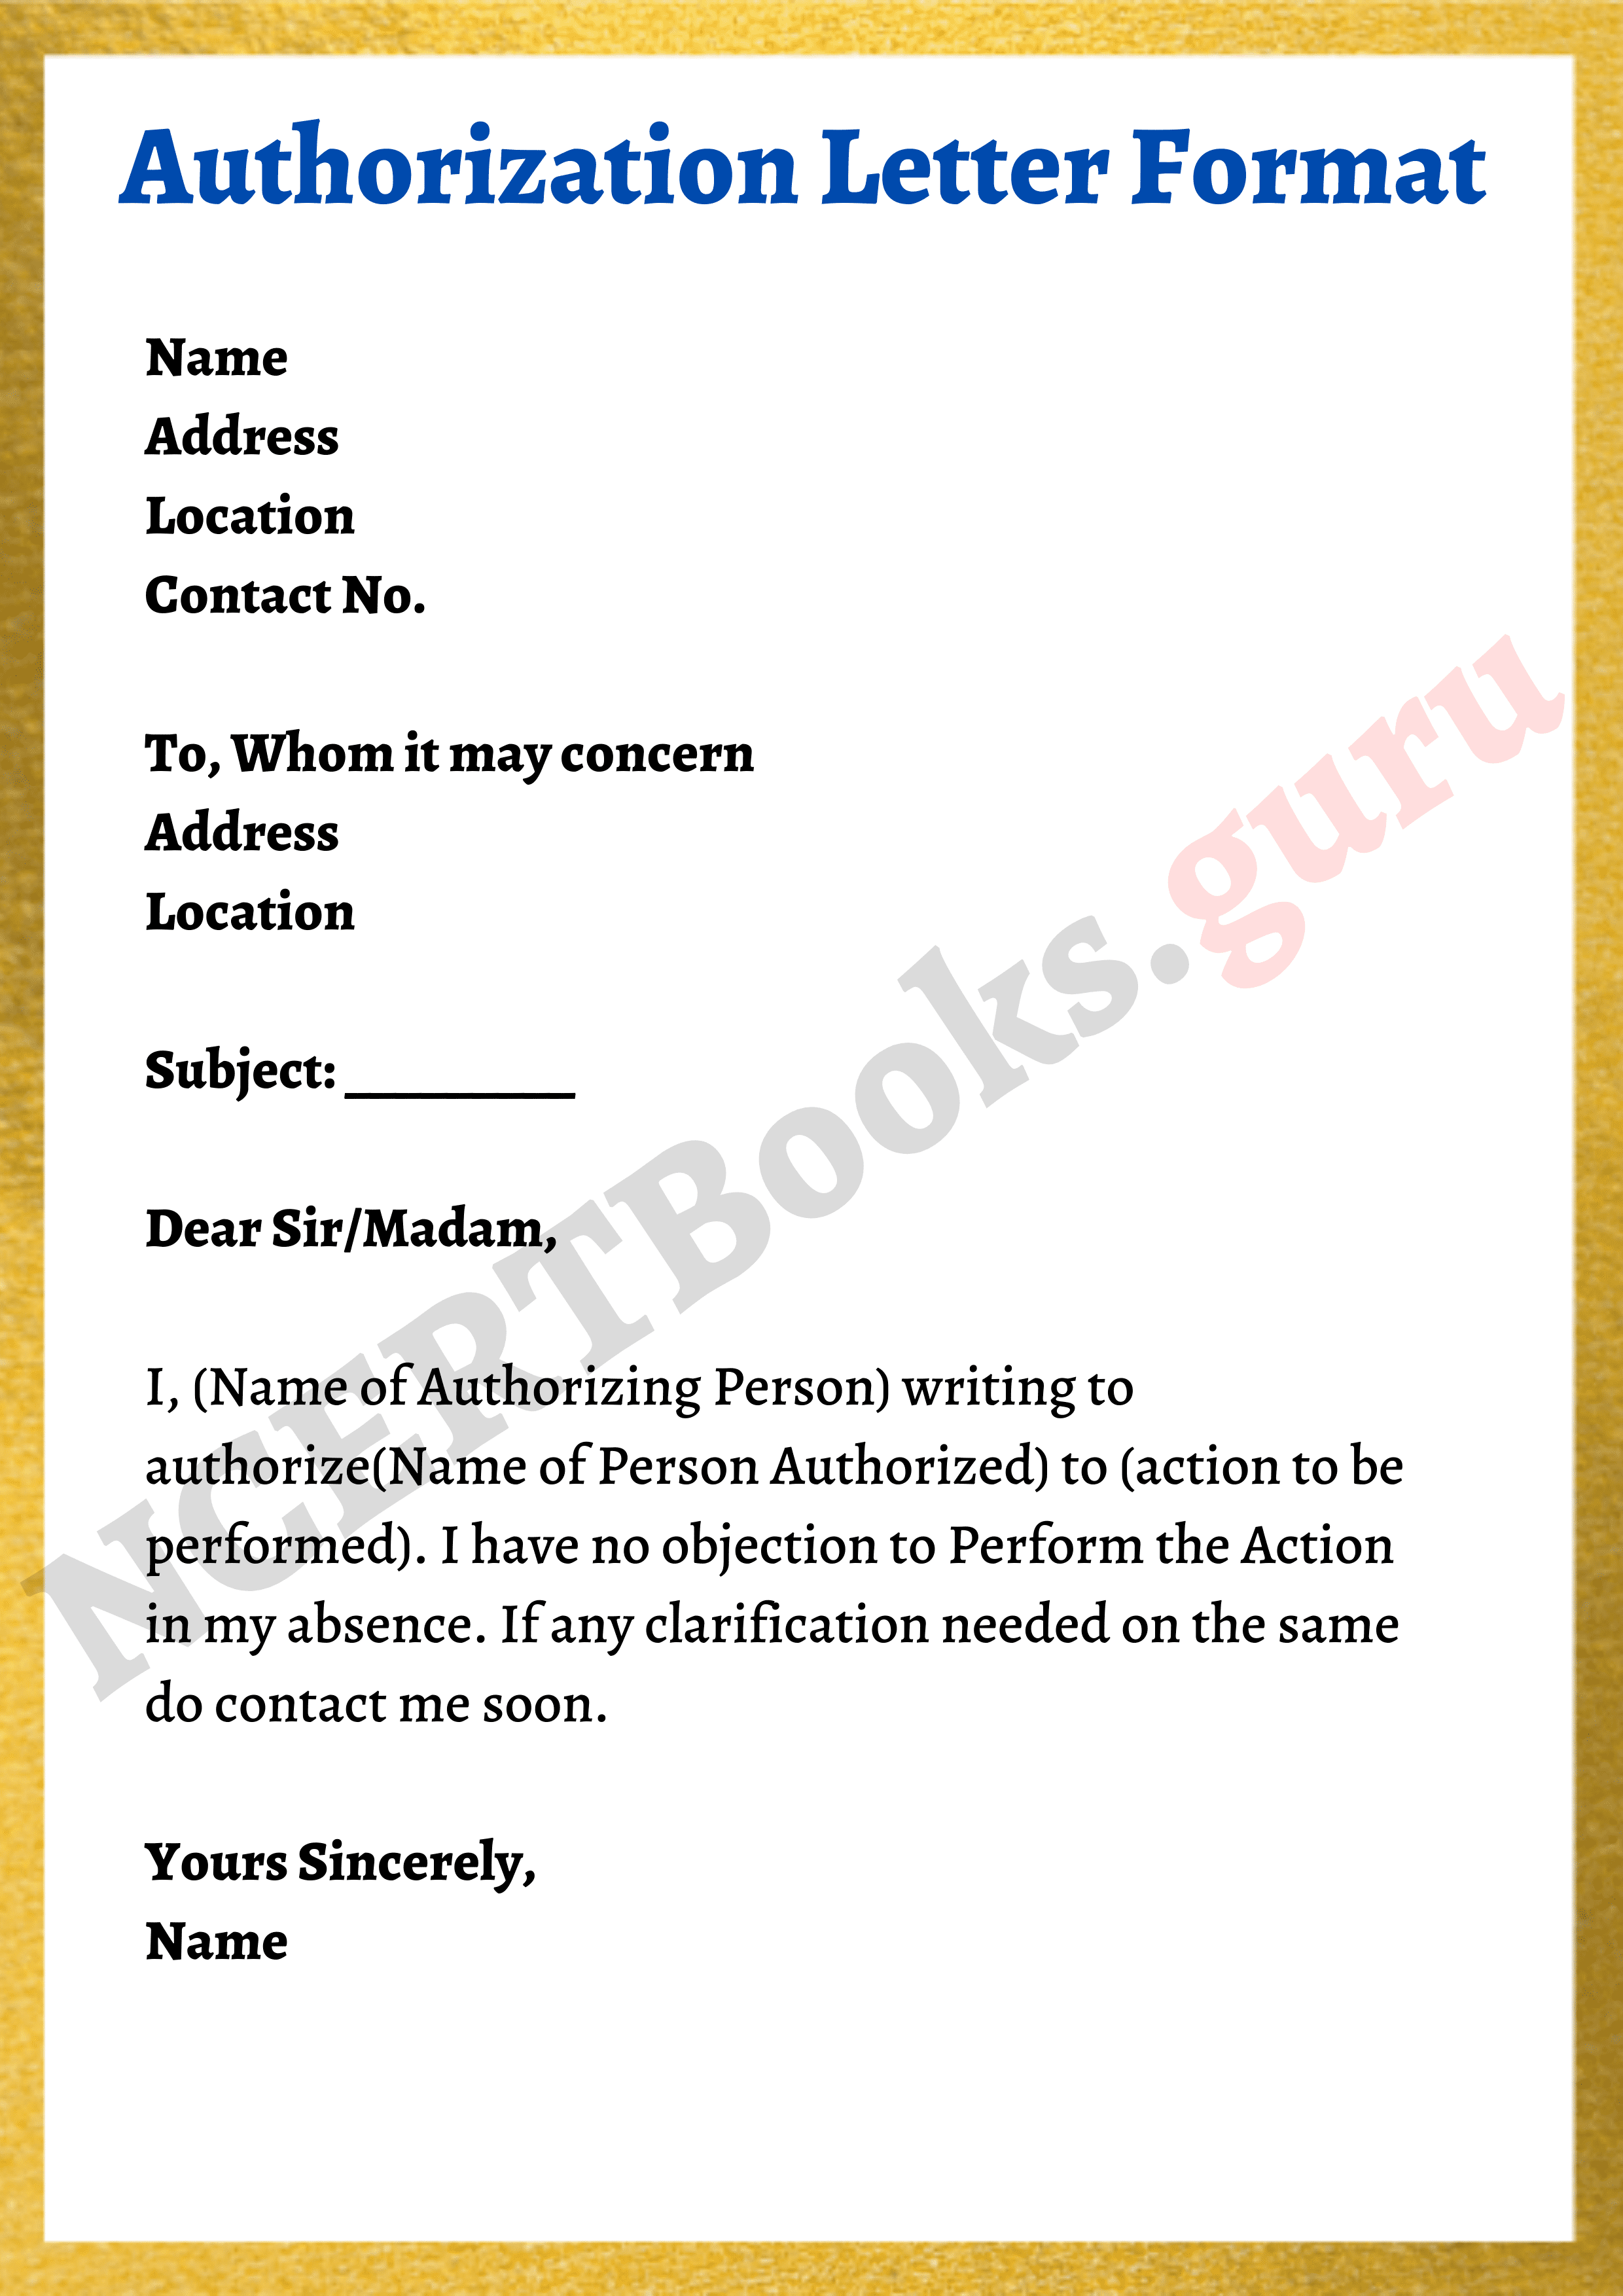 great-info-about-specimen-of-authority-letter-realtor-resume-sample